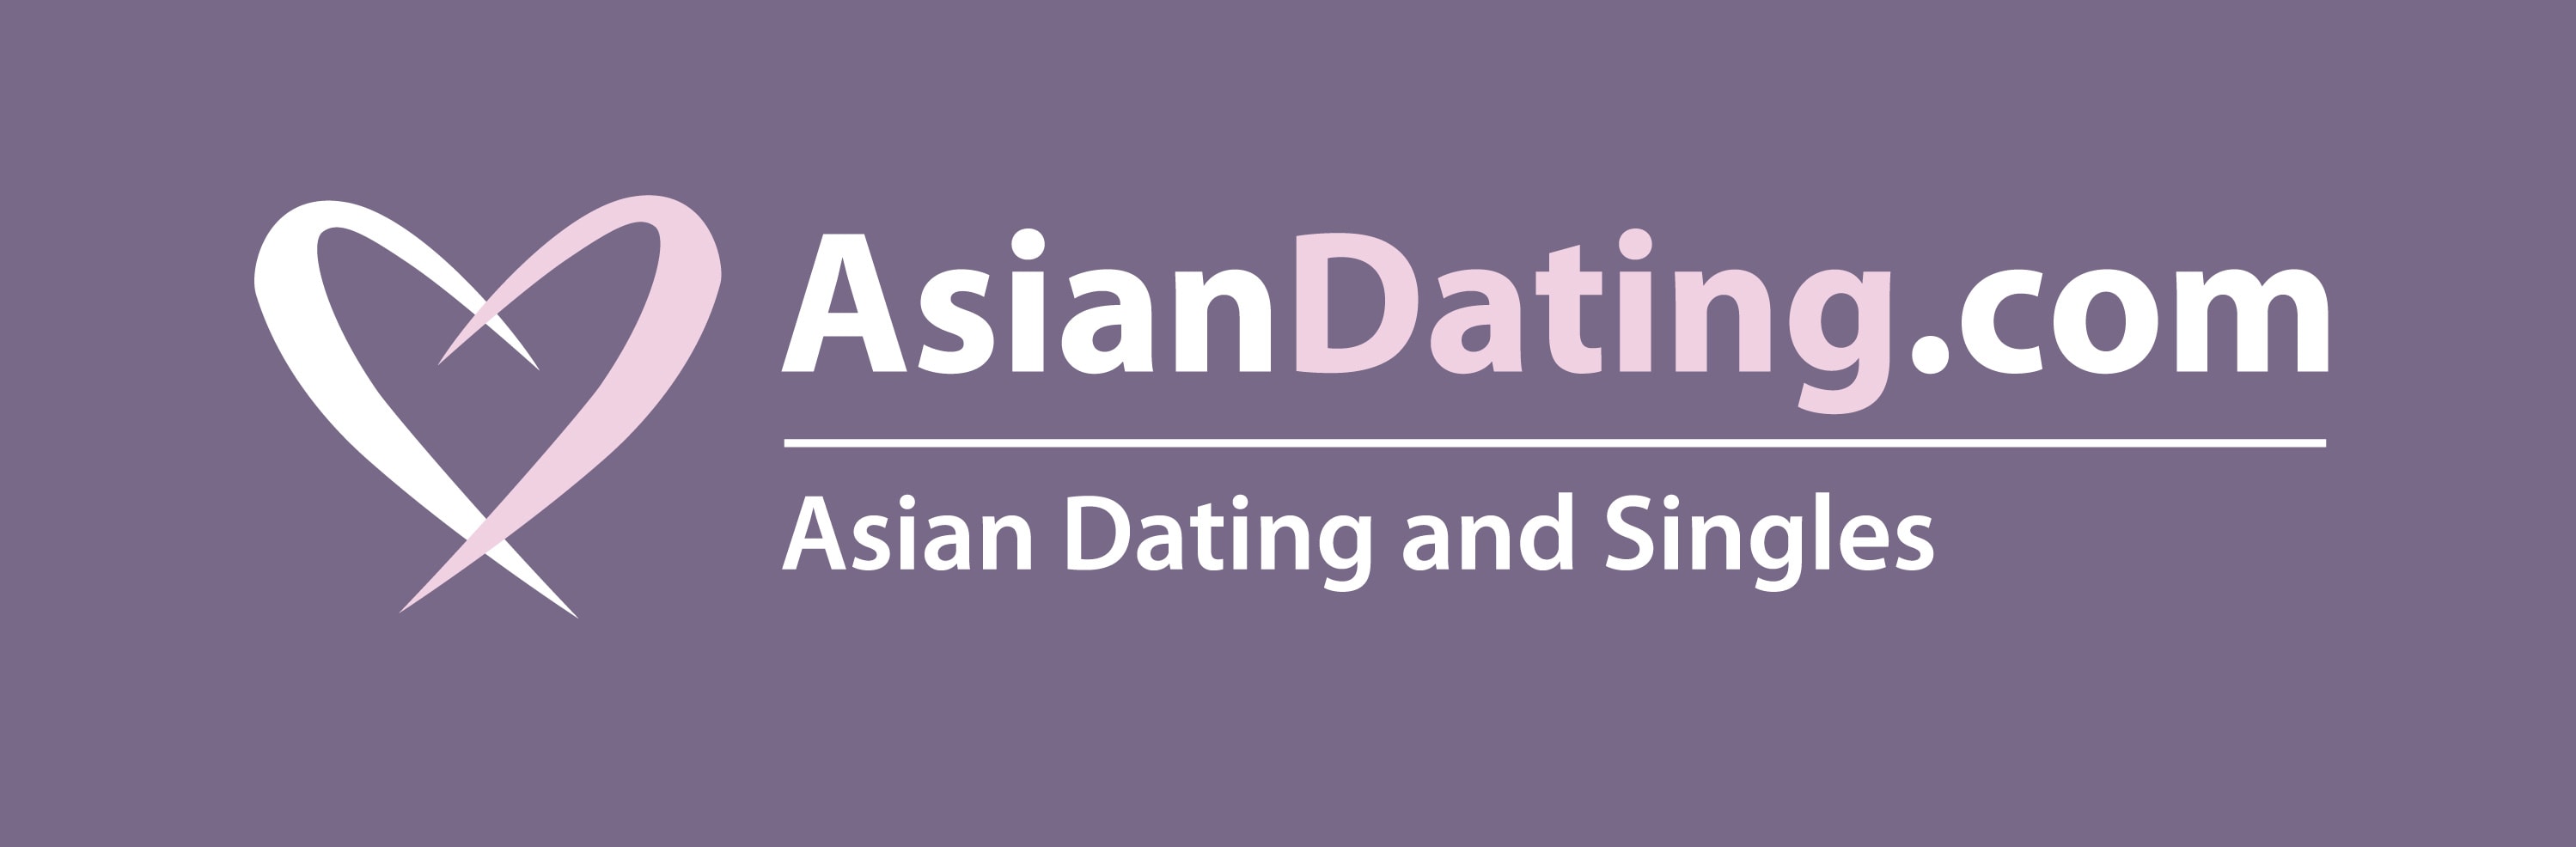 top asian online dating sites reviews